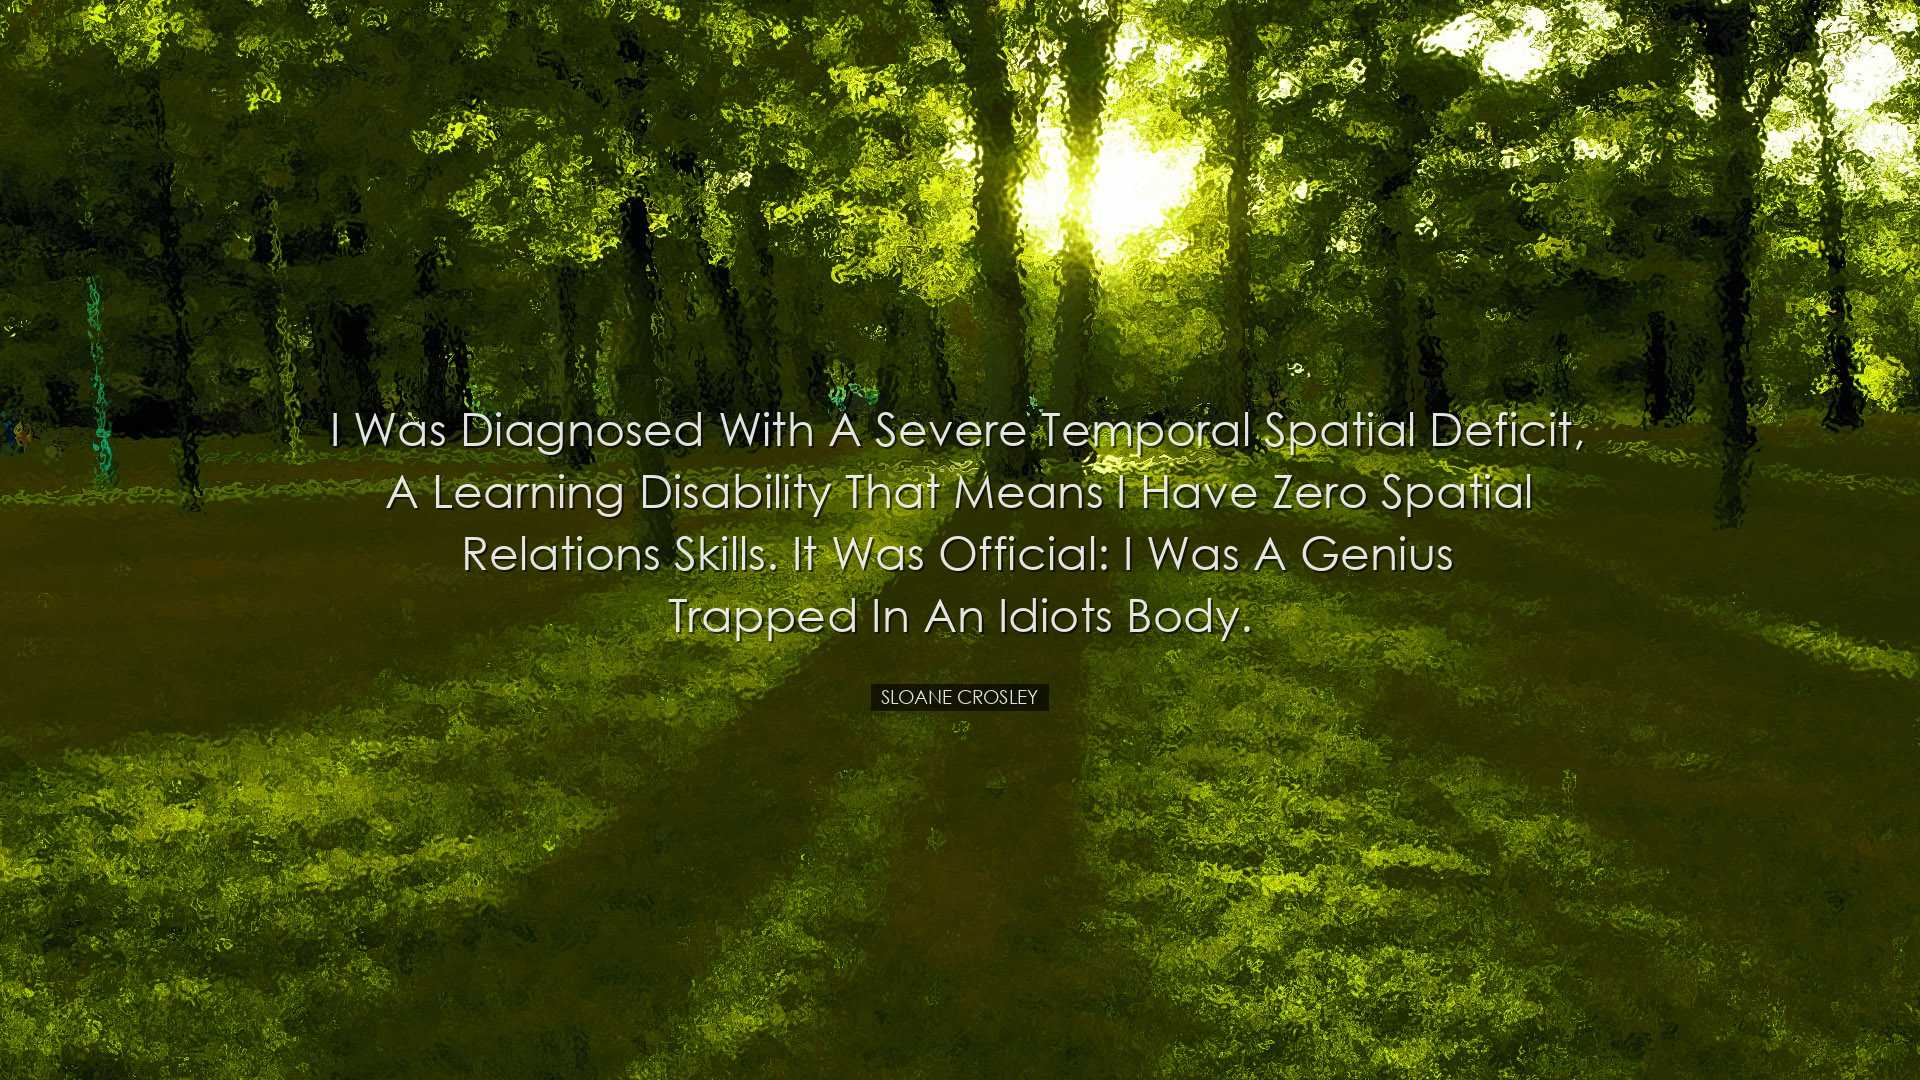 I was diagnosed with a severe temporal spatial deficit, a learning